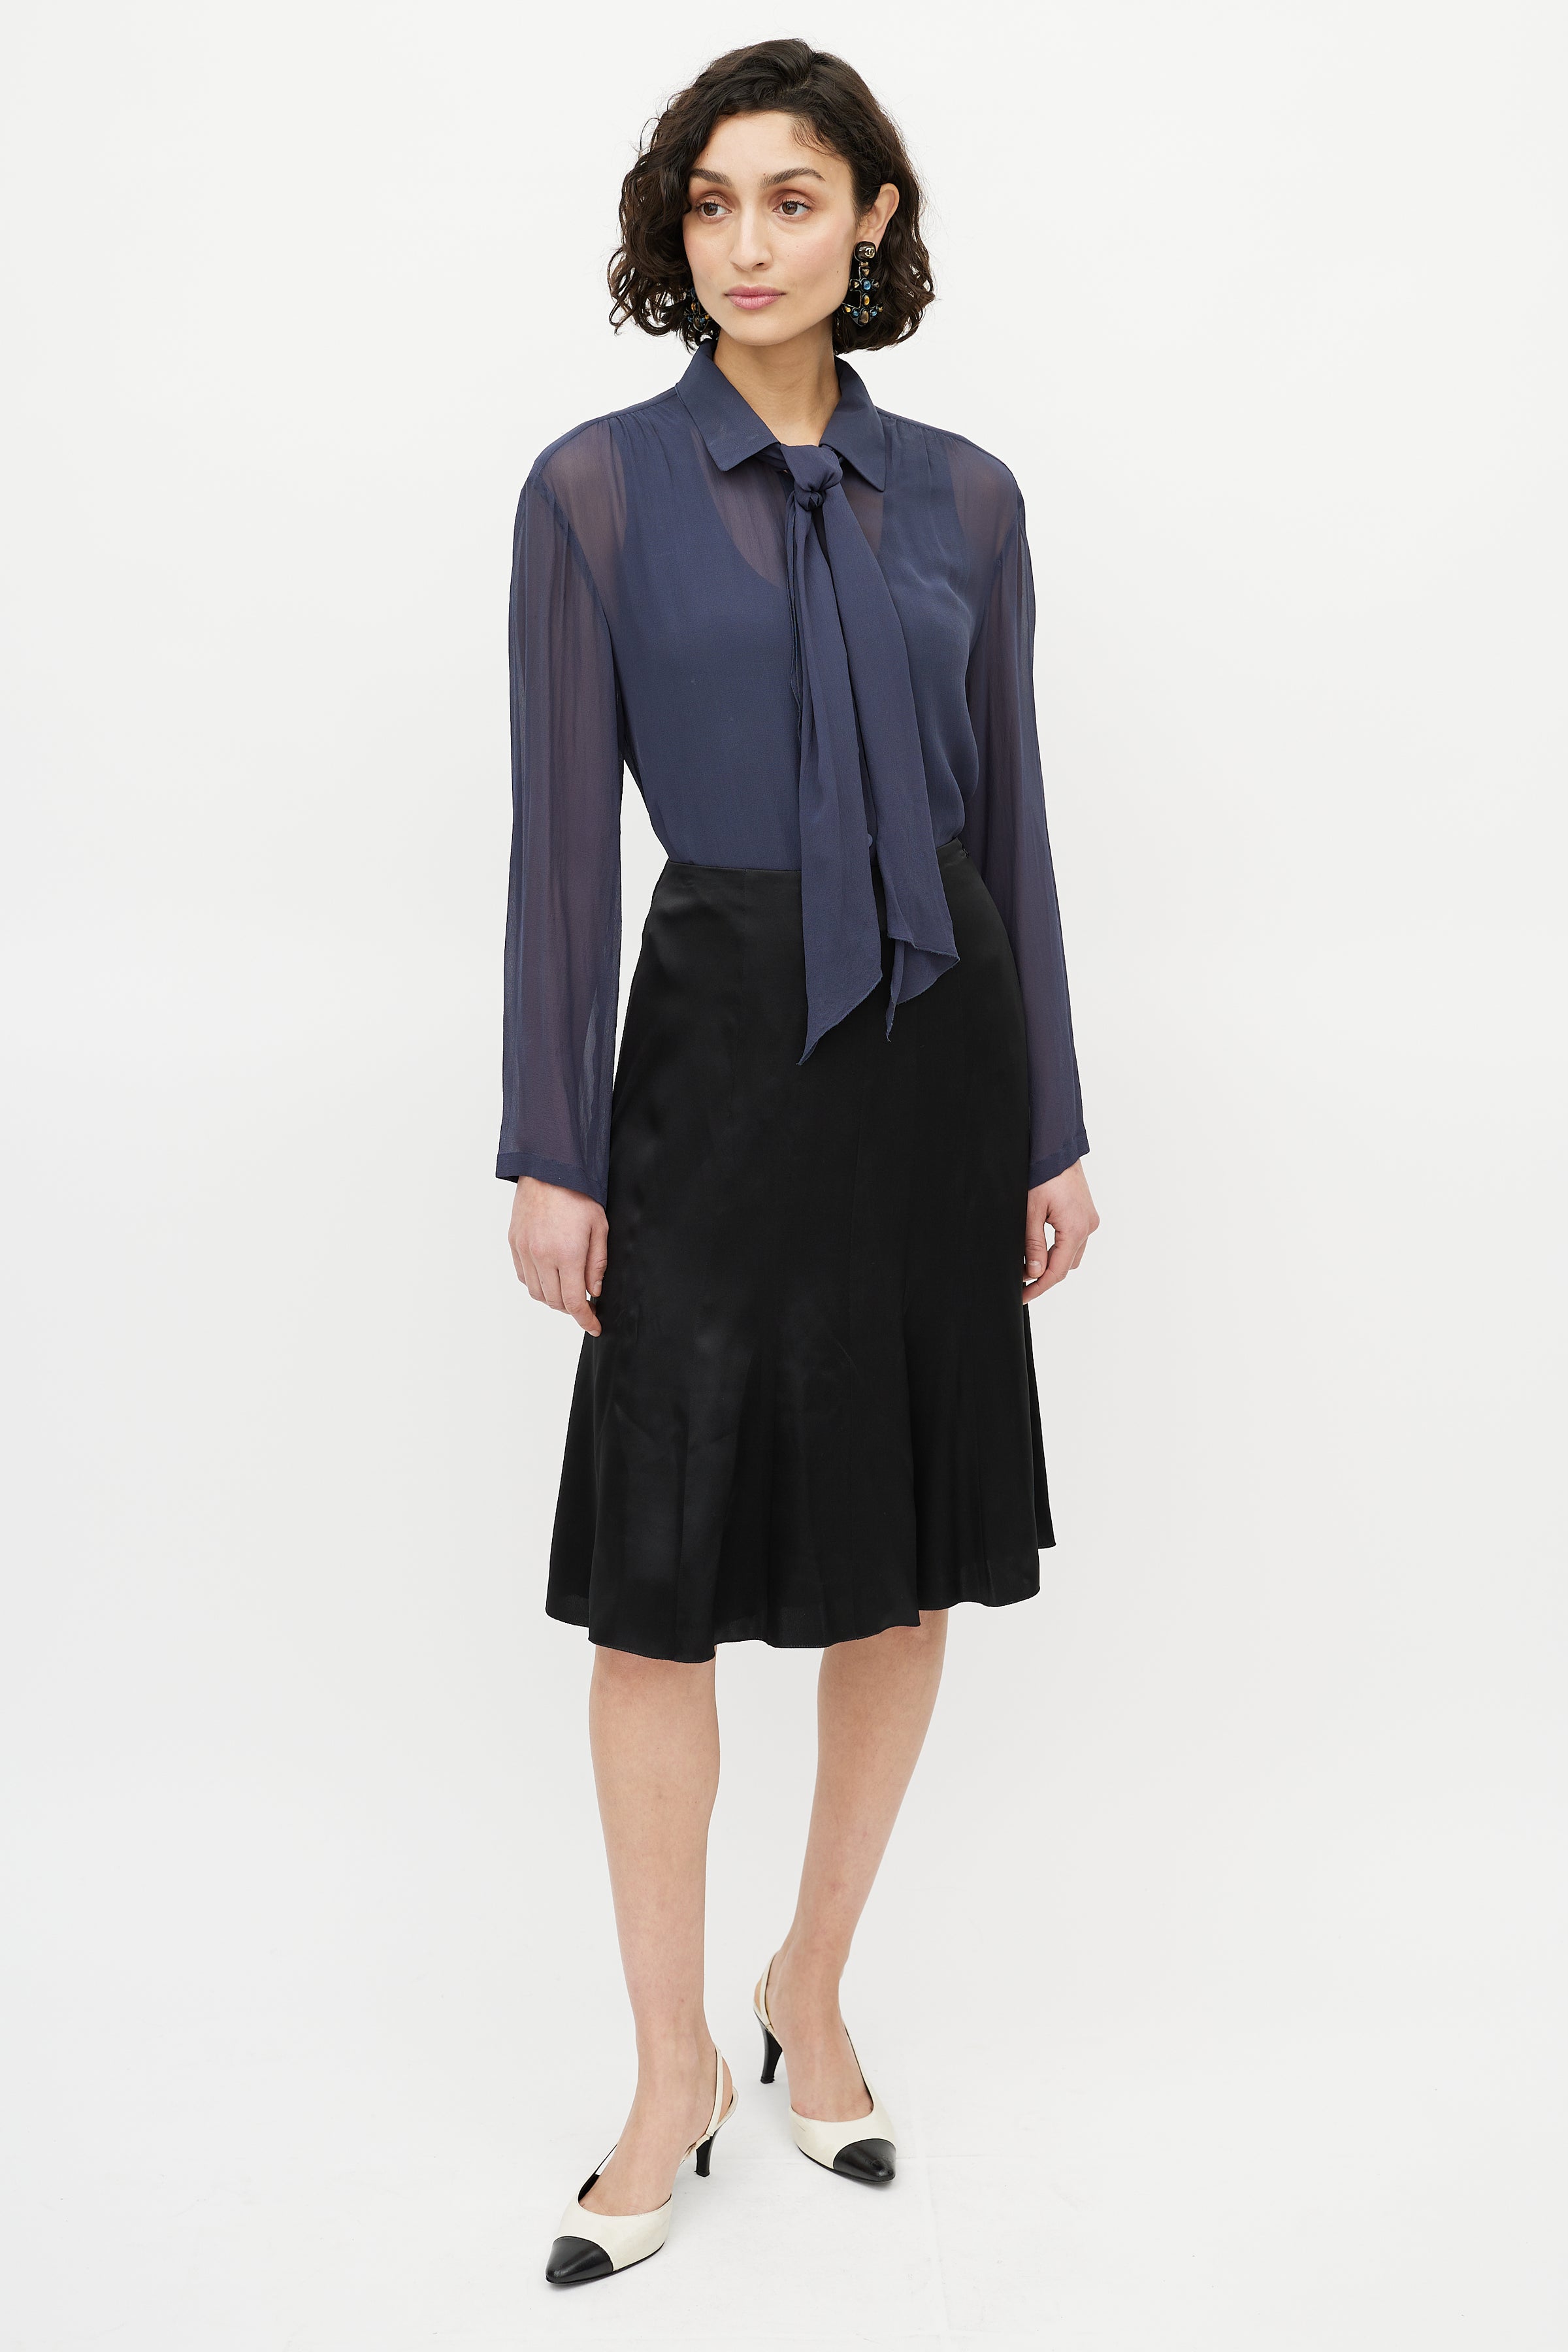 Chanel // – Scarf Consignment Navy Blouse Sheer VSP